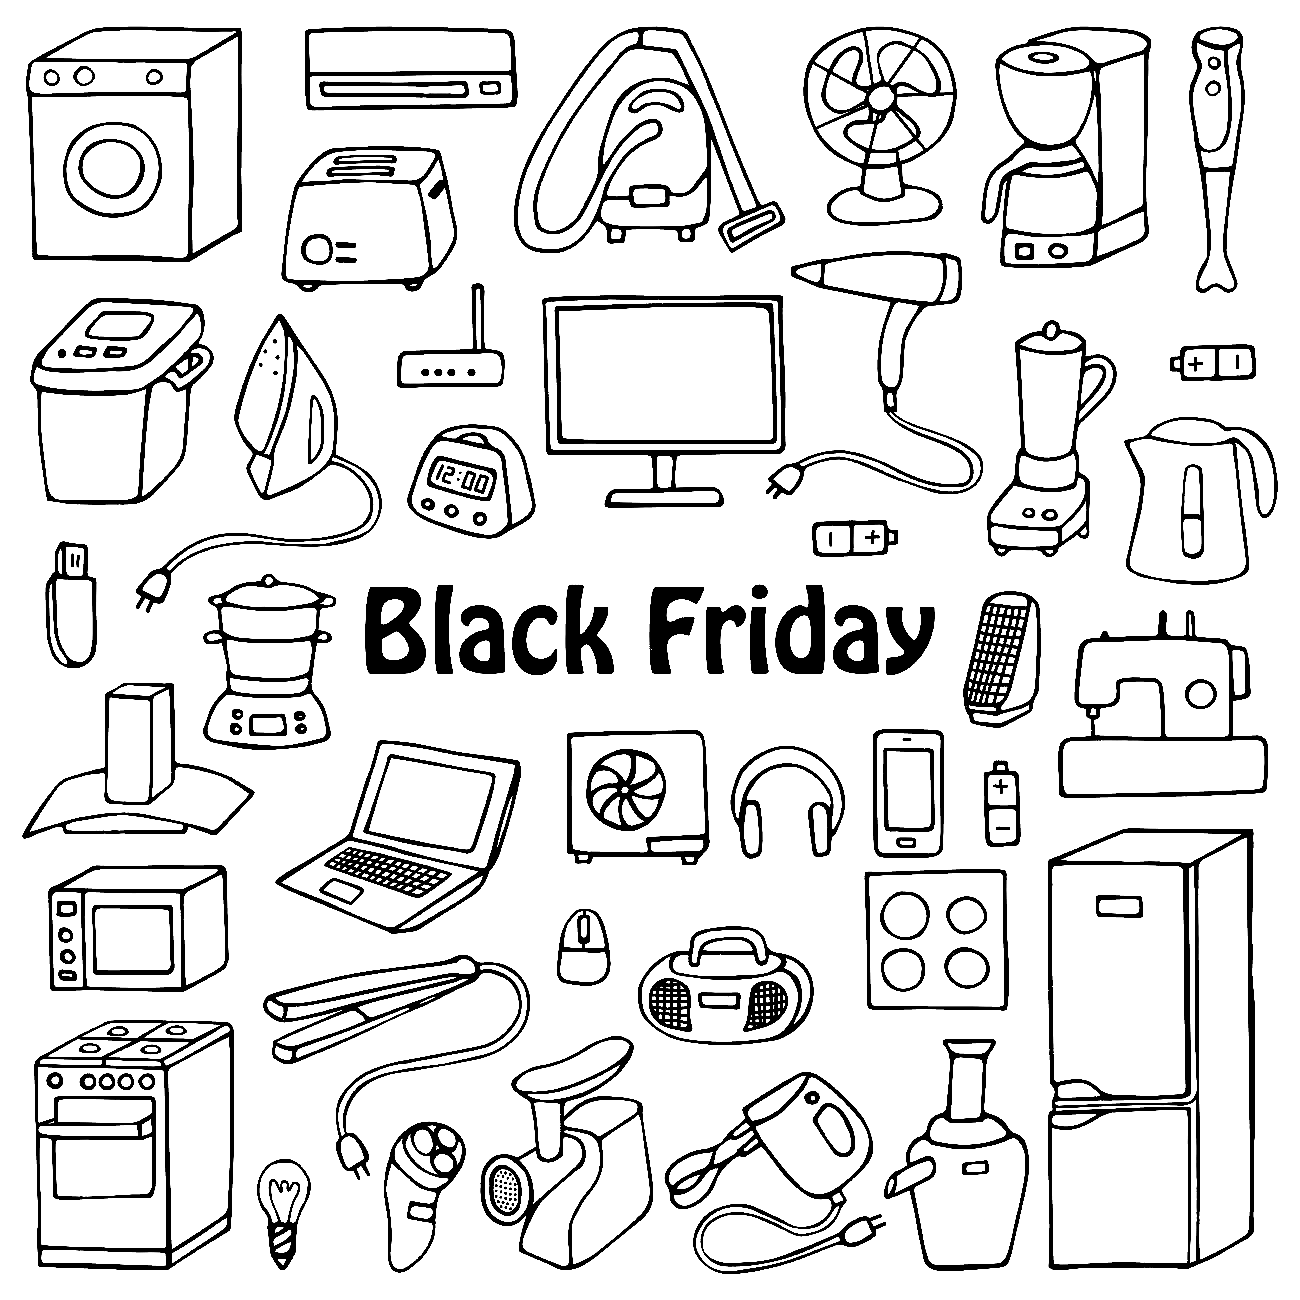 Black Friday Household Appliances Coloring Page